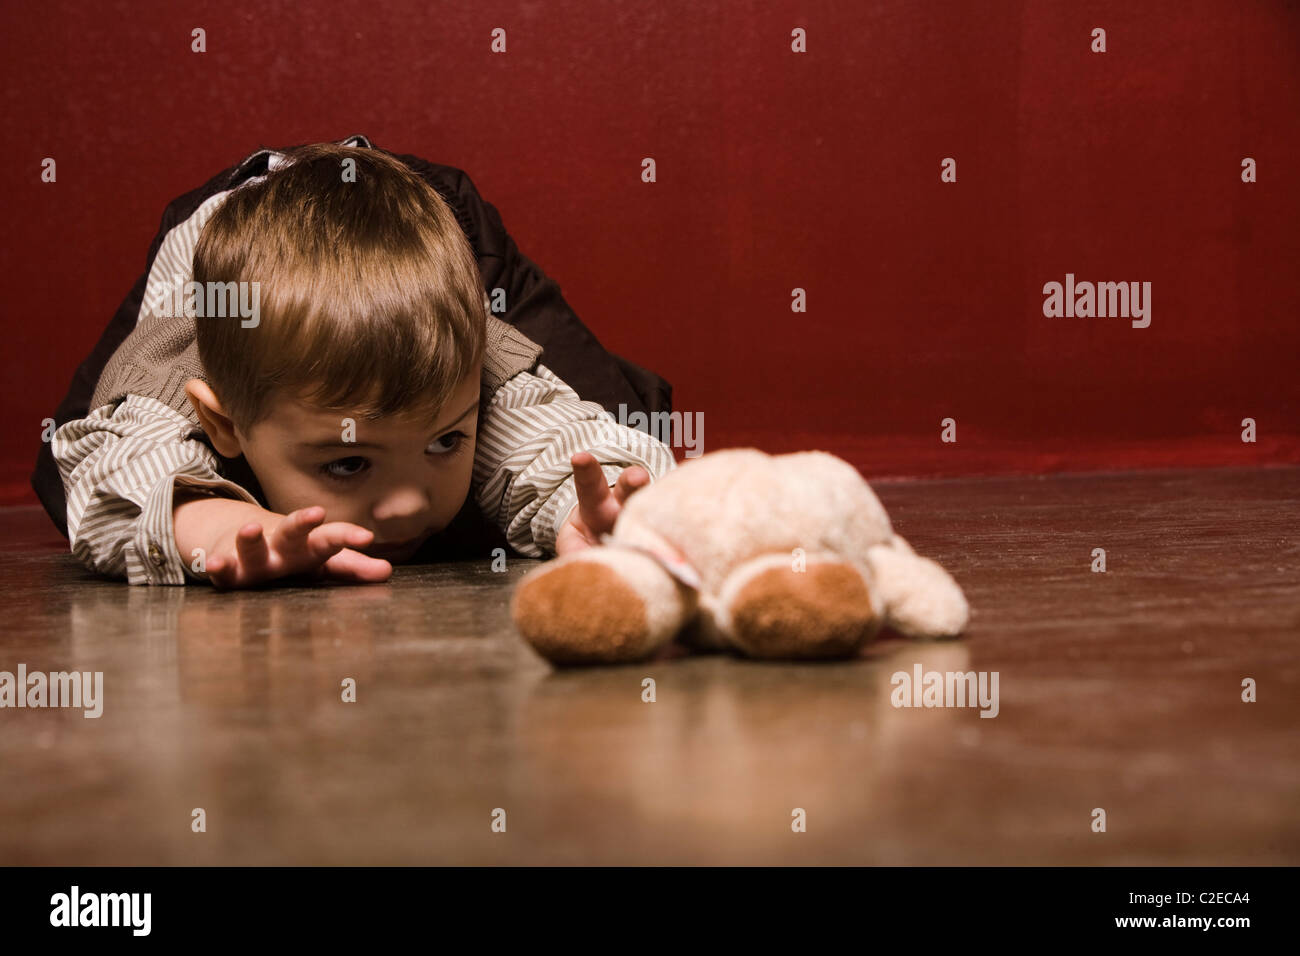 Toddler Crawling On Floor Reaching For Teddy Bear Stock Photo